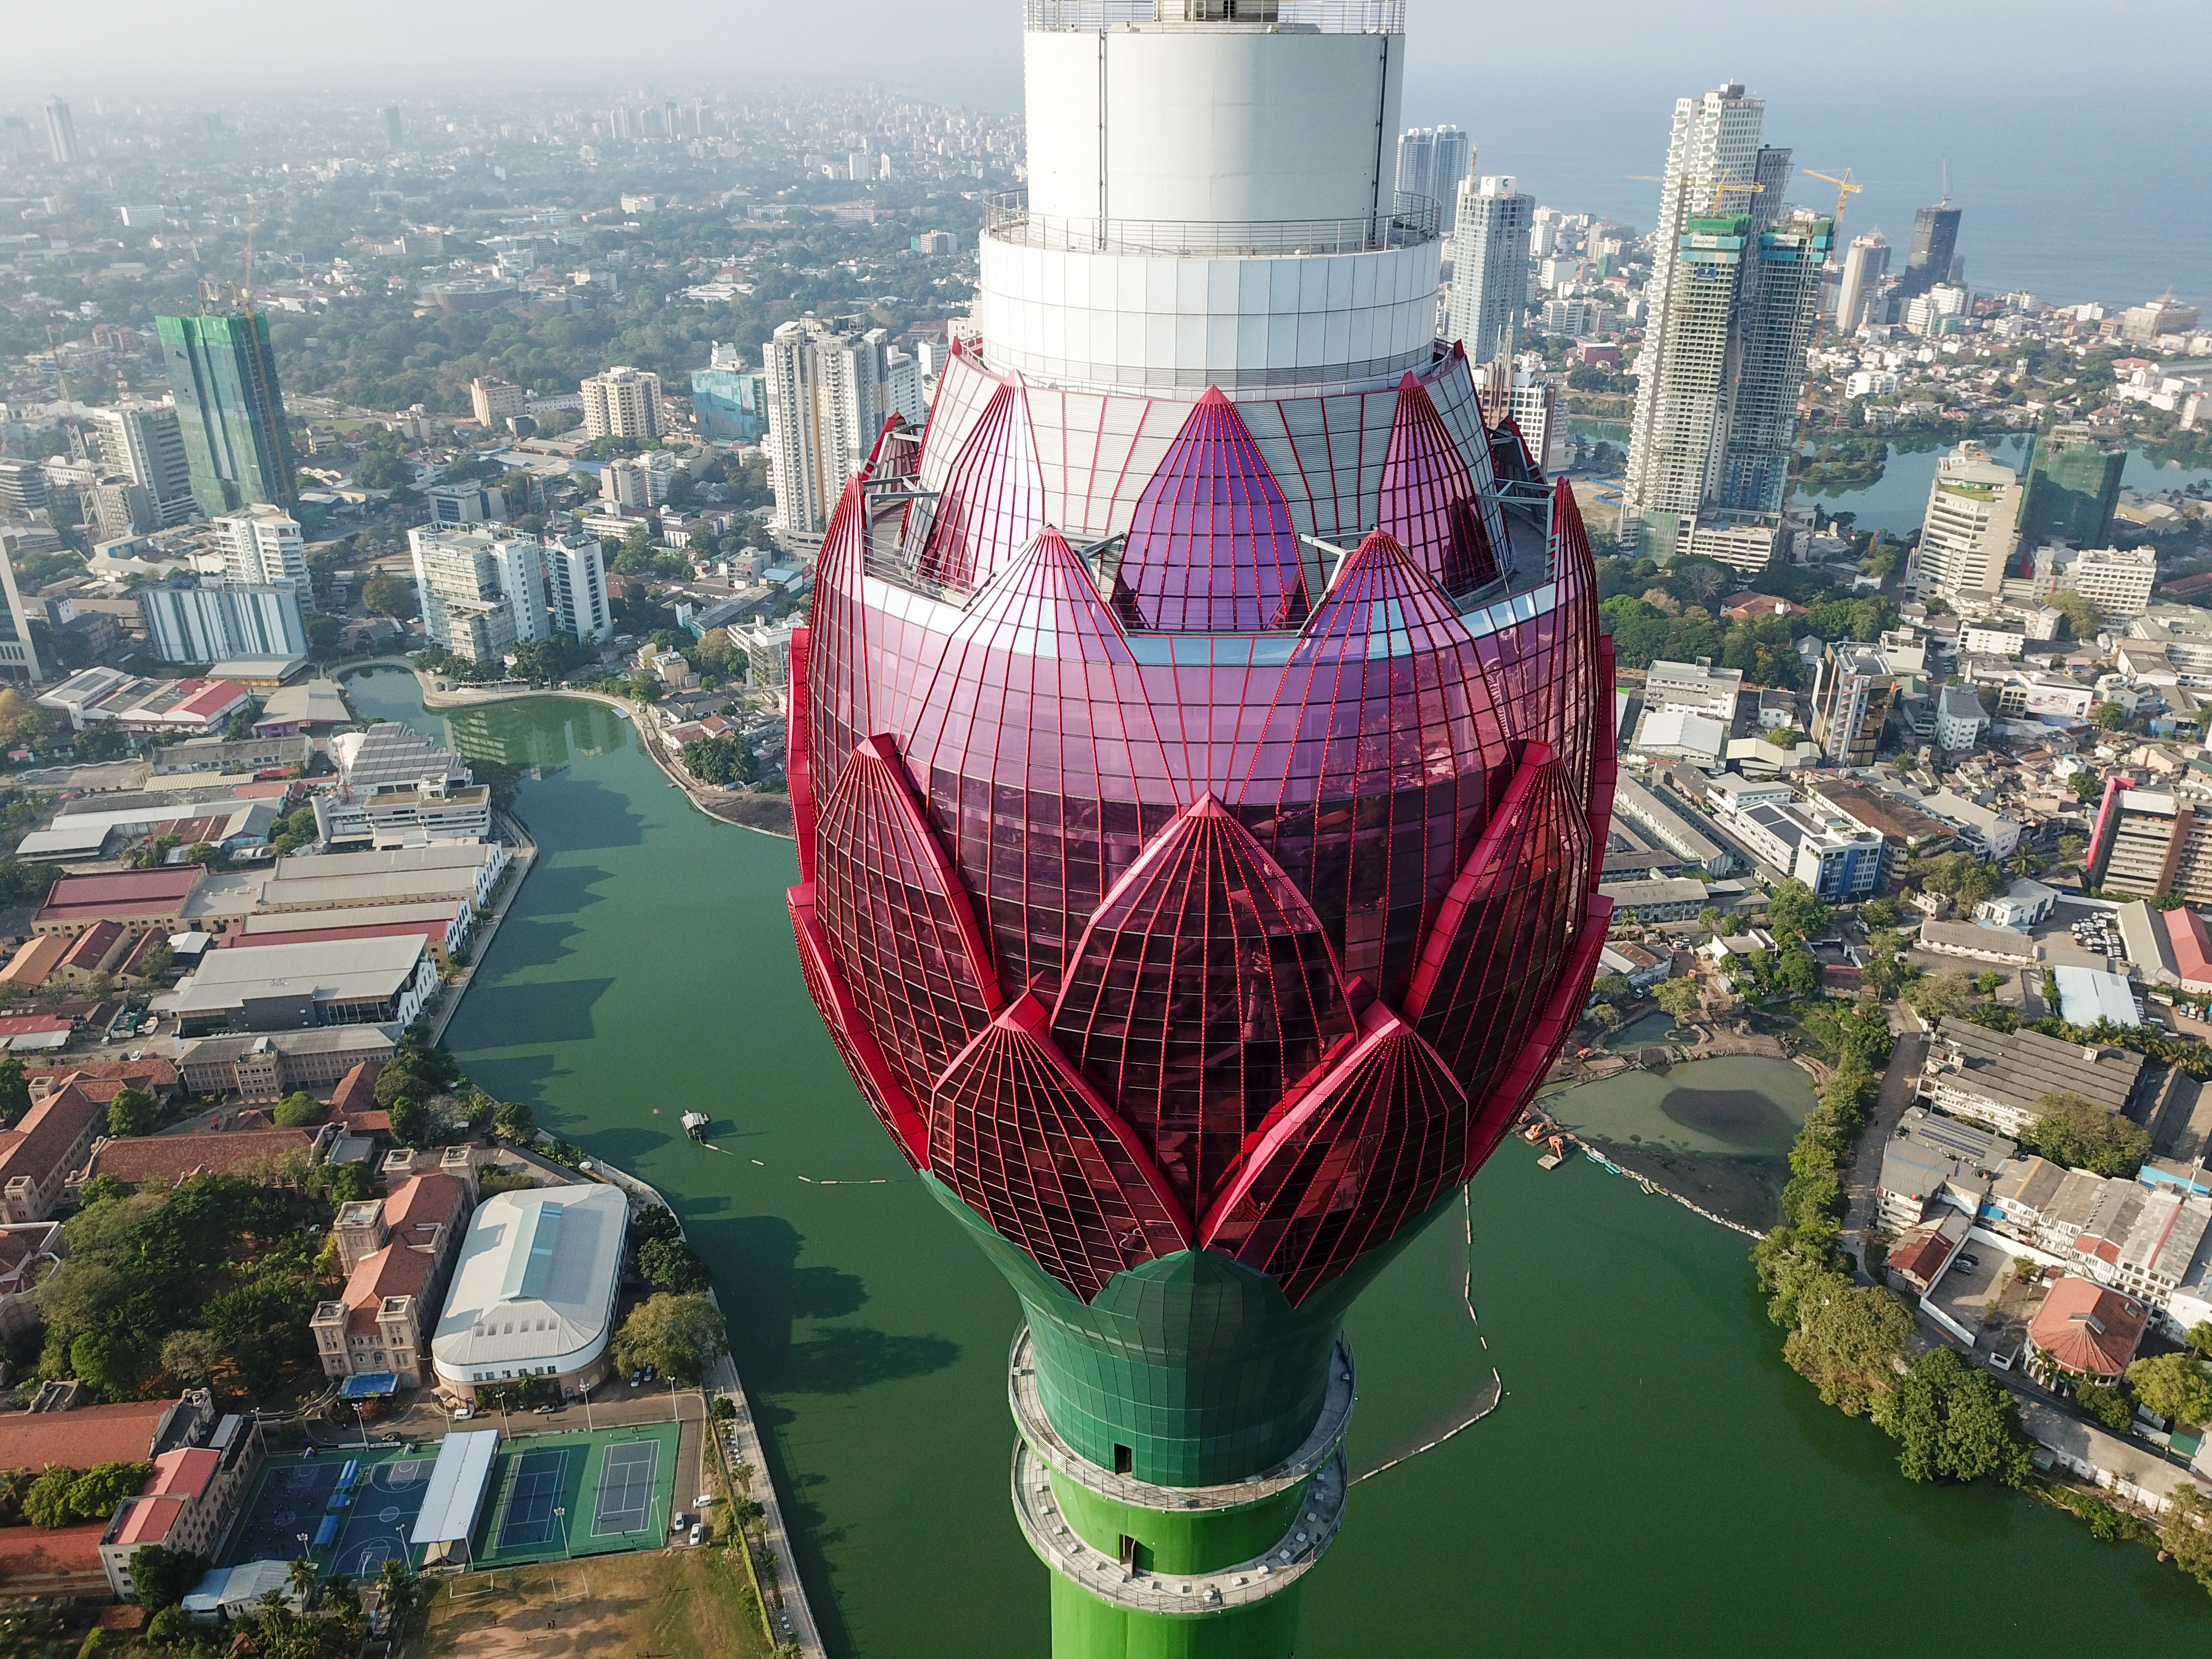 The Lotus Tower, built under the Belt and Road Initiative, in Colombo, Sri Lanka. Photo: Xinhua/File